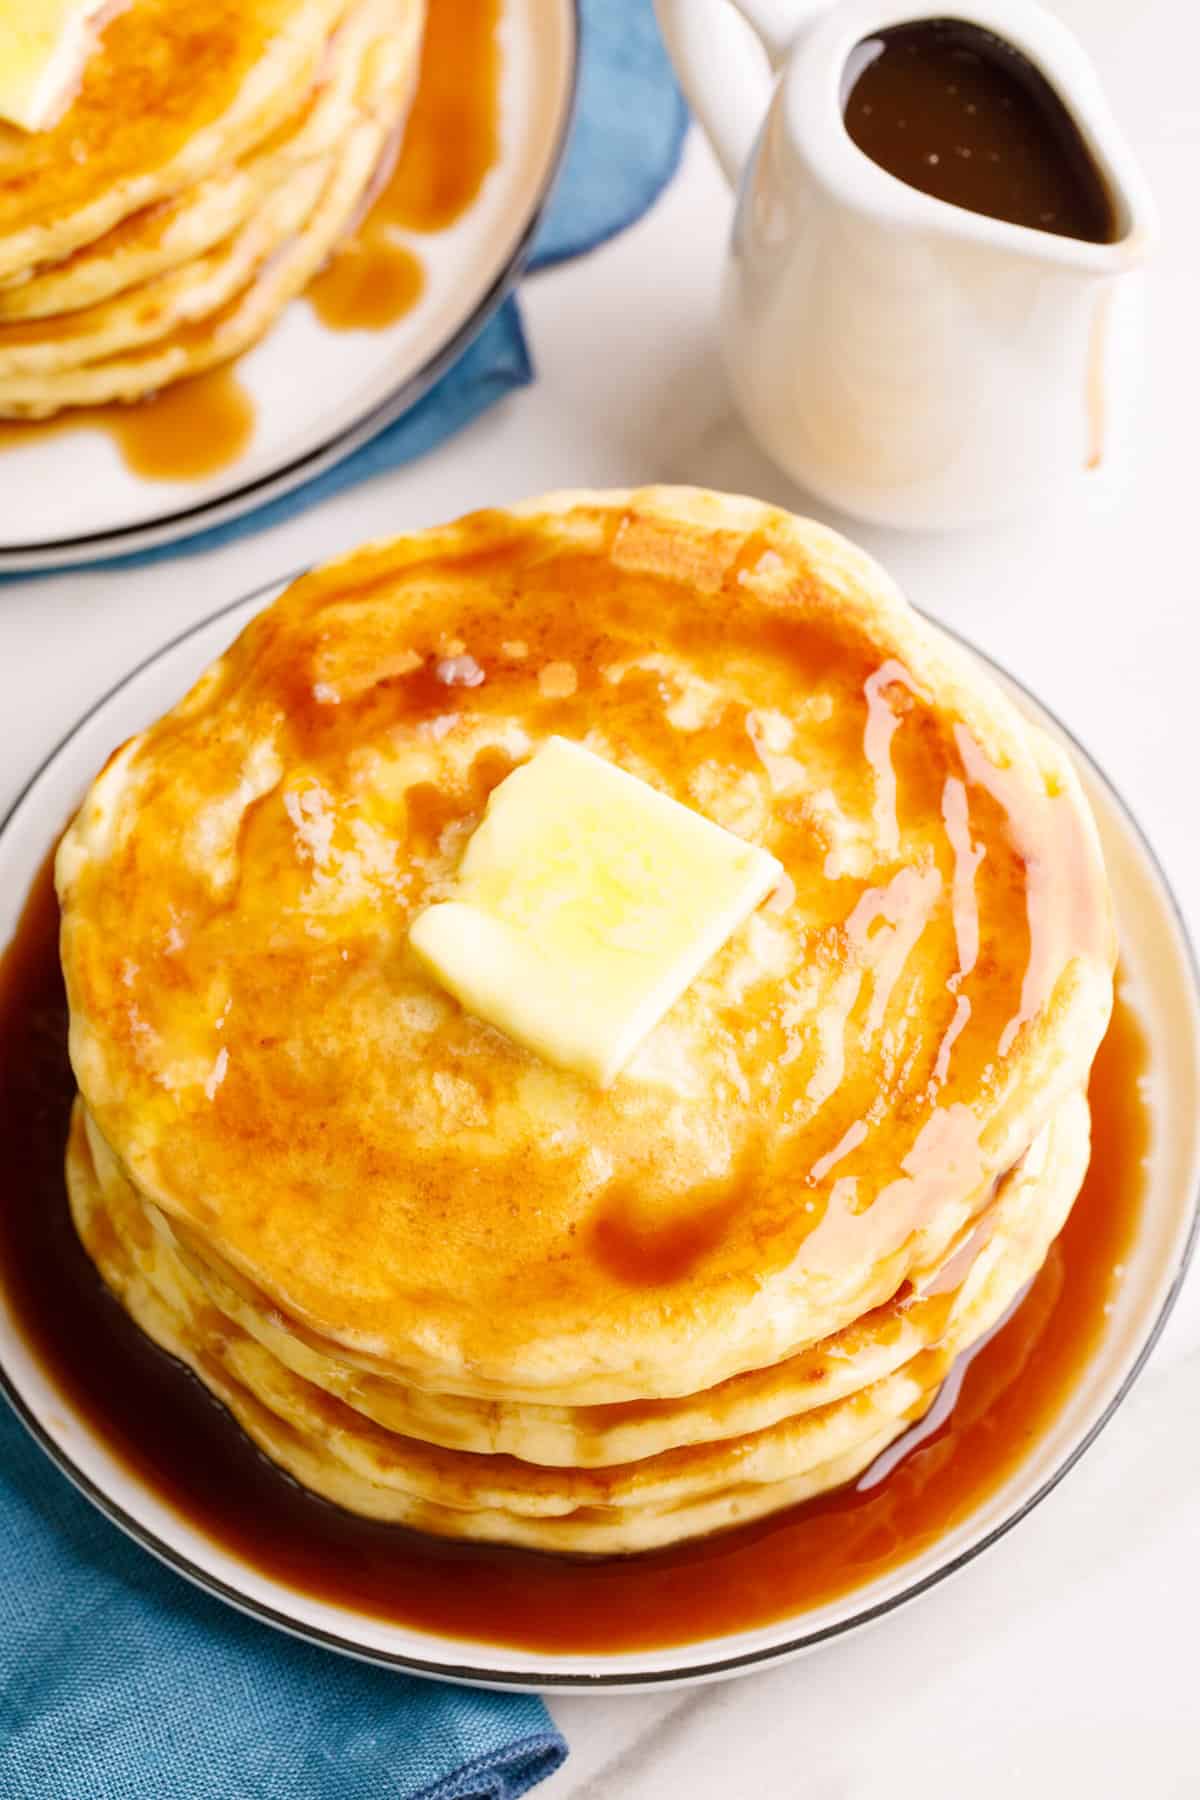 top down image of a stack of four pancakes served on a plate with topped with syrup and butter